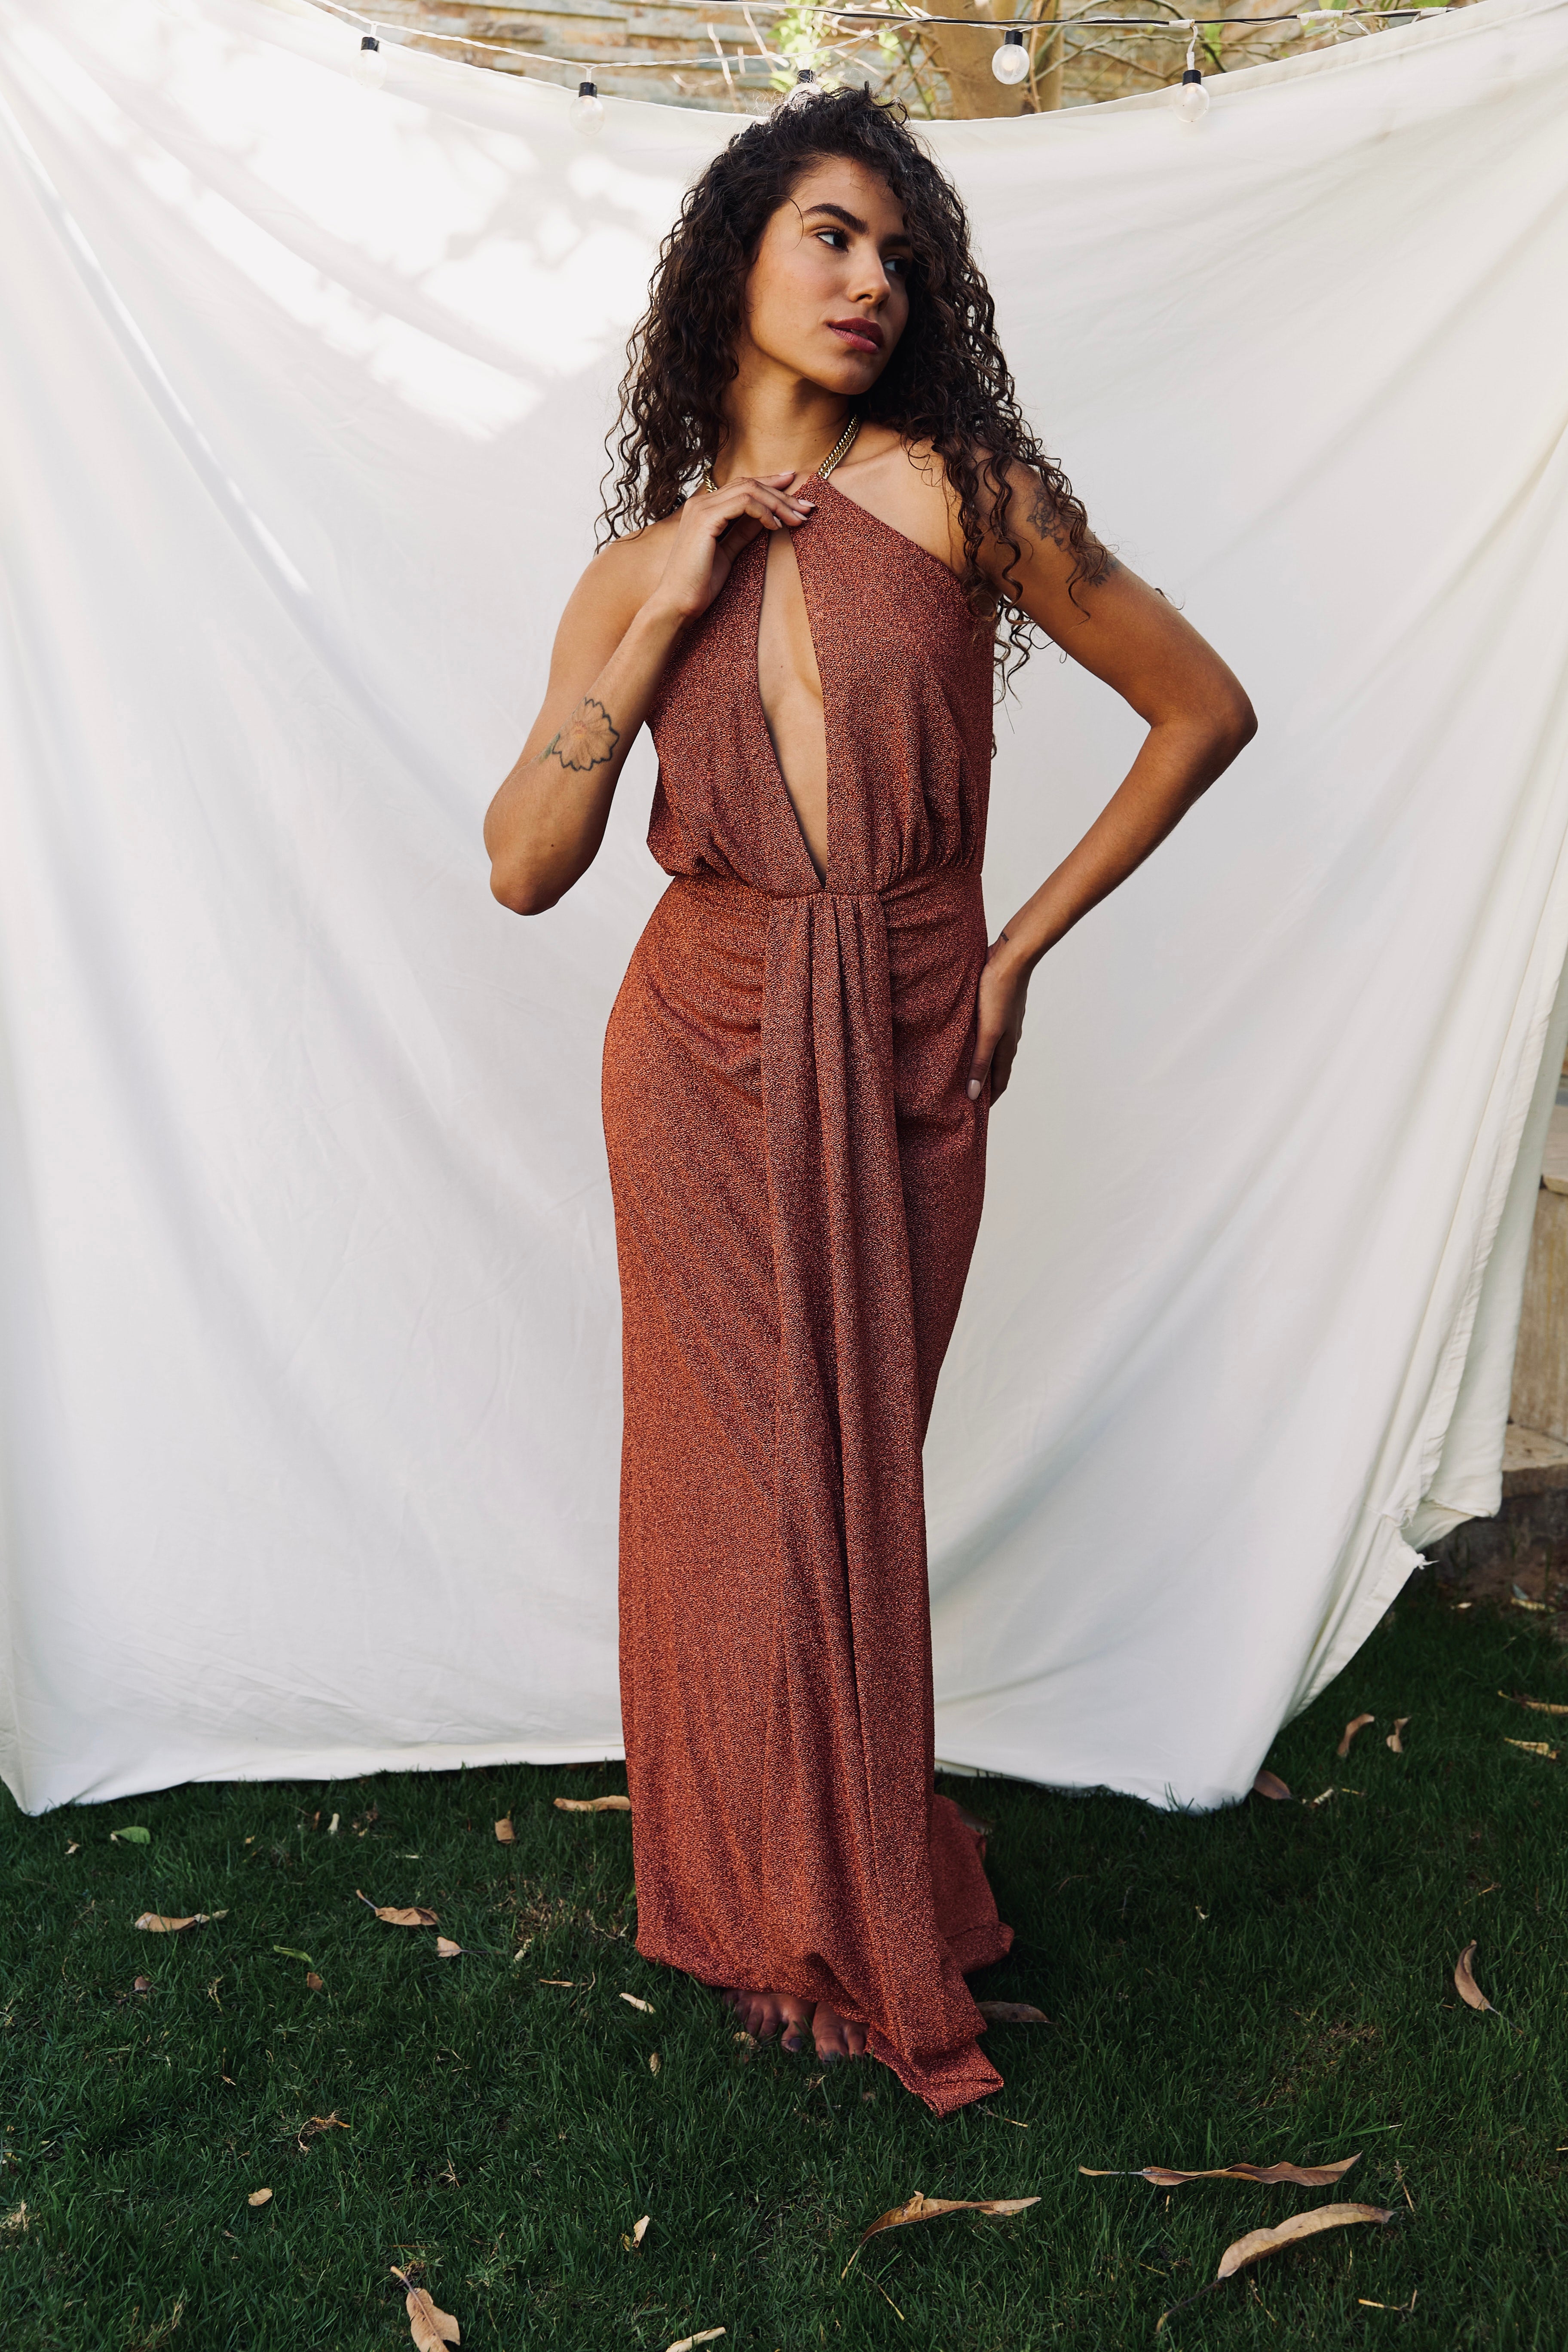 SHIMMERY HALTER NECK DRESS WITH CHAINS IN ORANGE